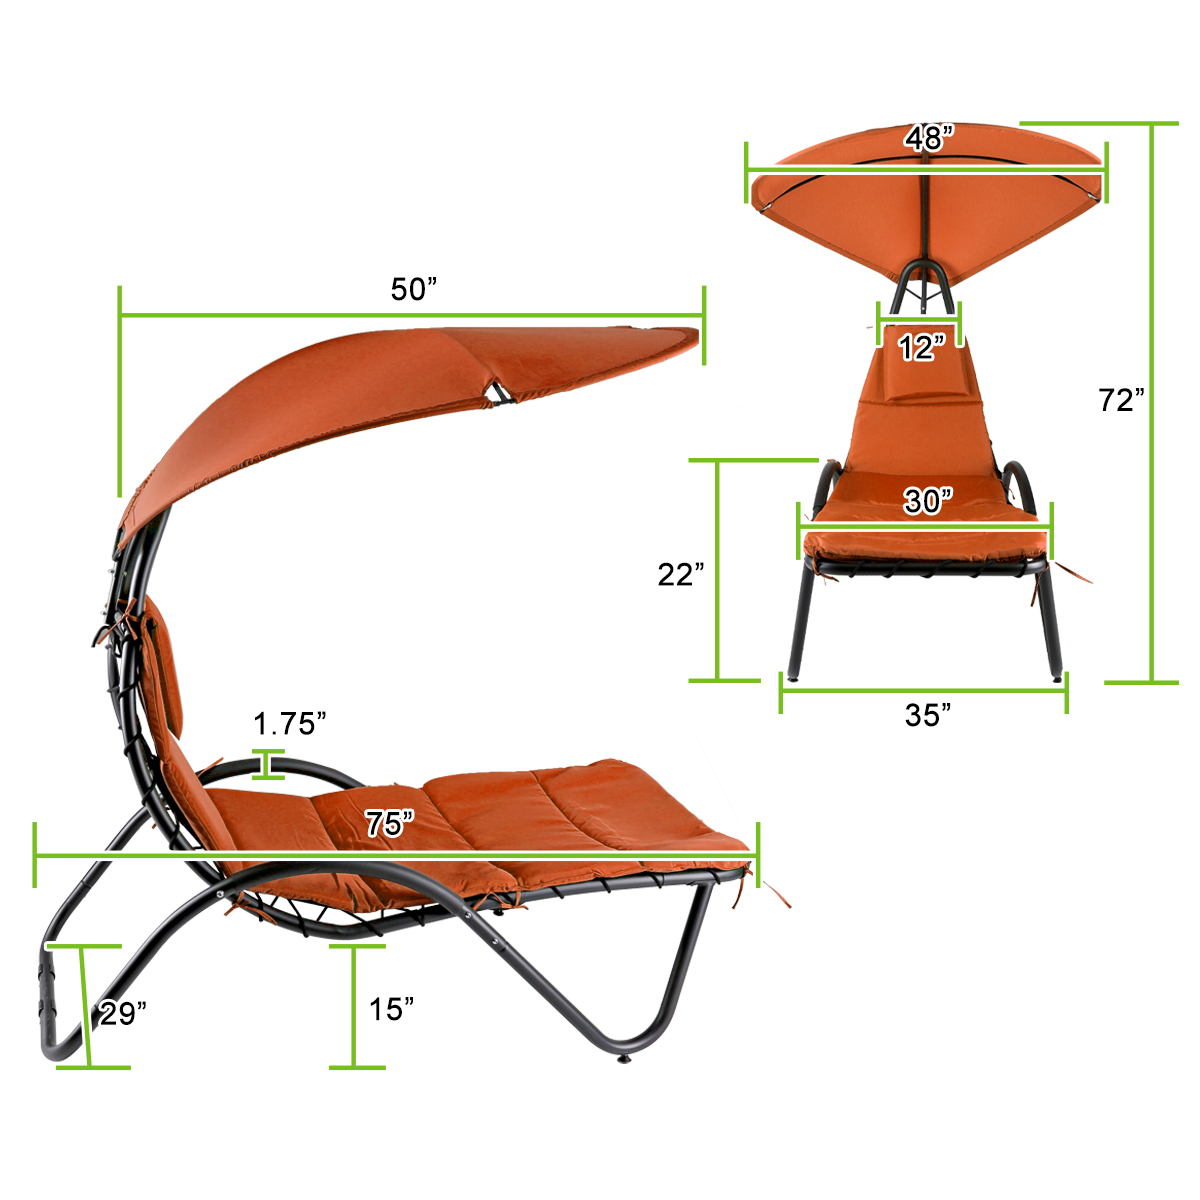 Hanging Chaise Lounger Chair Patio Porch Arc Swing Hammock Chair Canopy Outdoor [Orange] - image 4 of 8